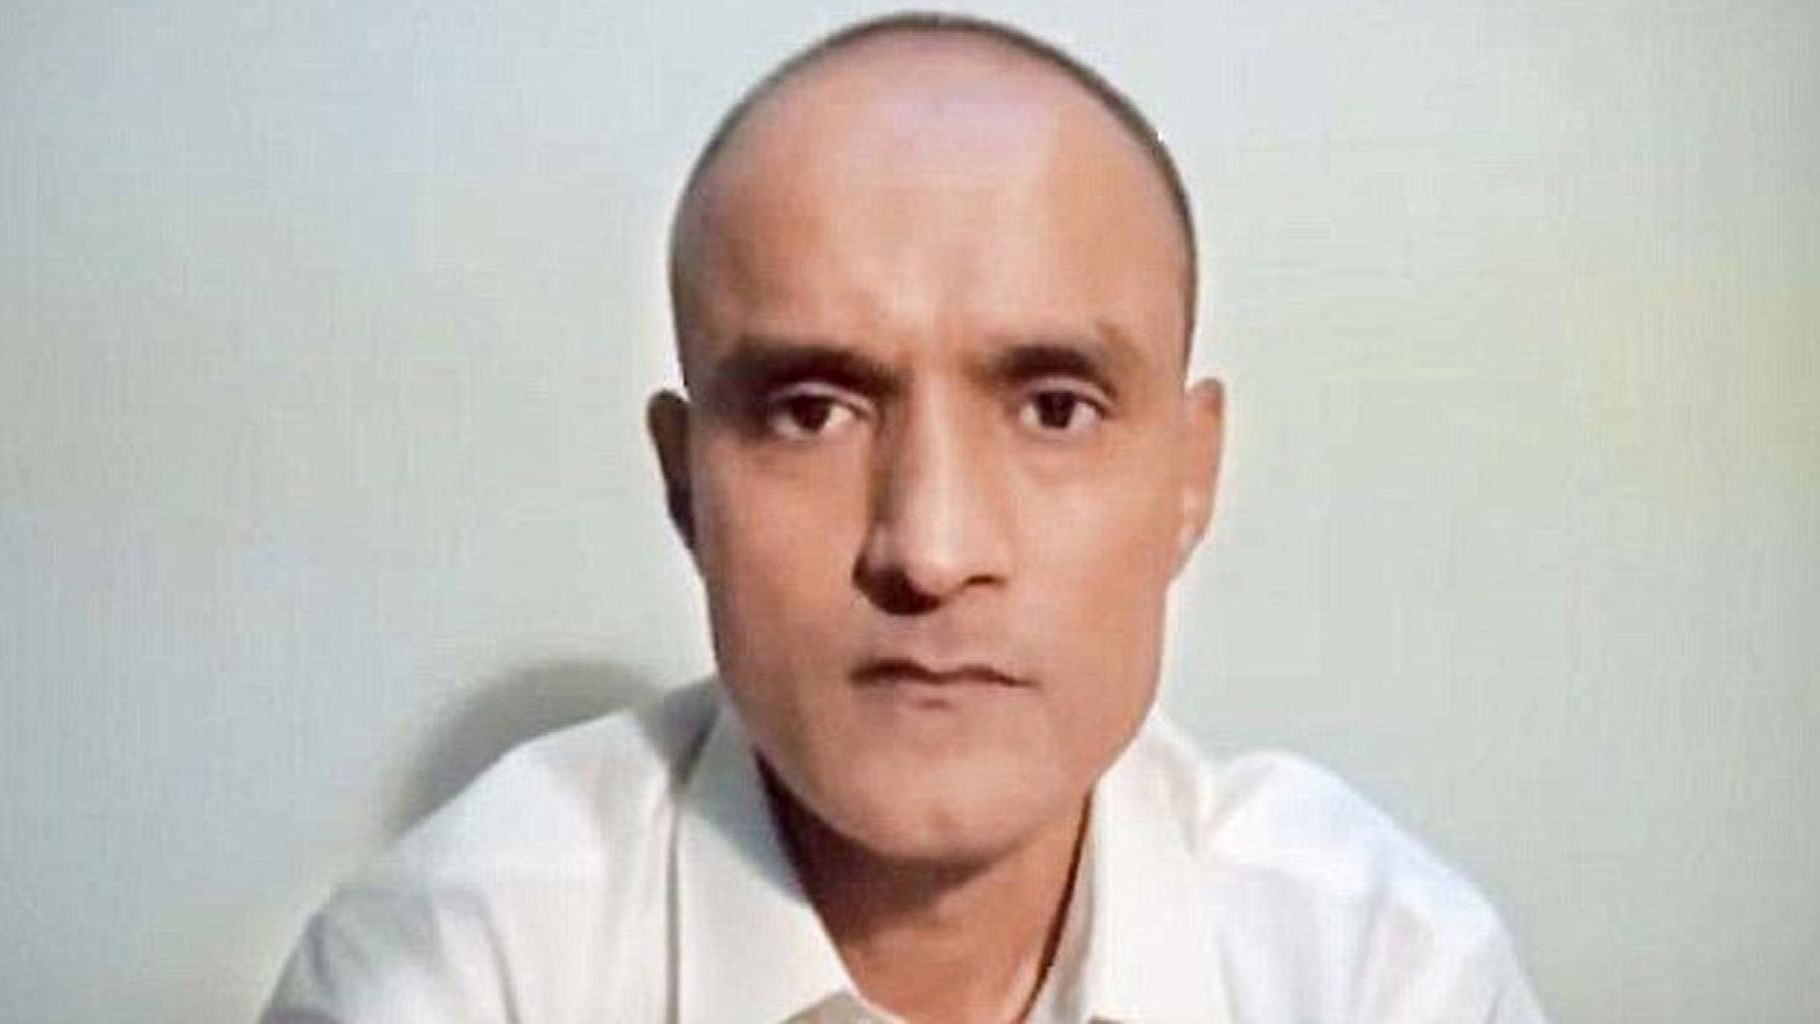 India has acknowledged Jadhav as a retired Indian Navy officer. (Photo Courtesy: YouTube/Dawn News)